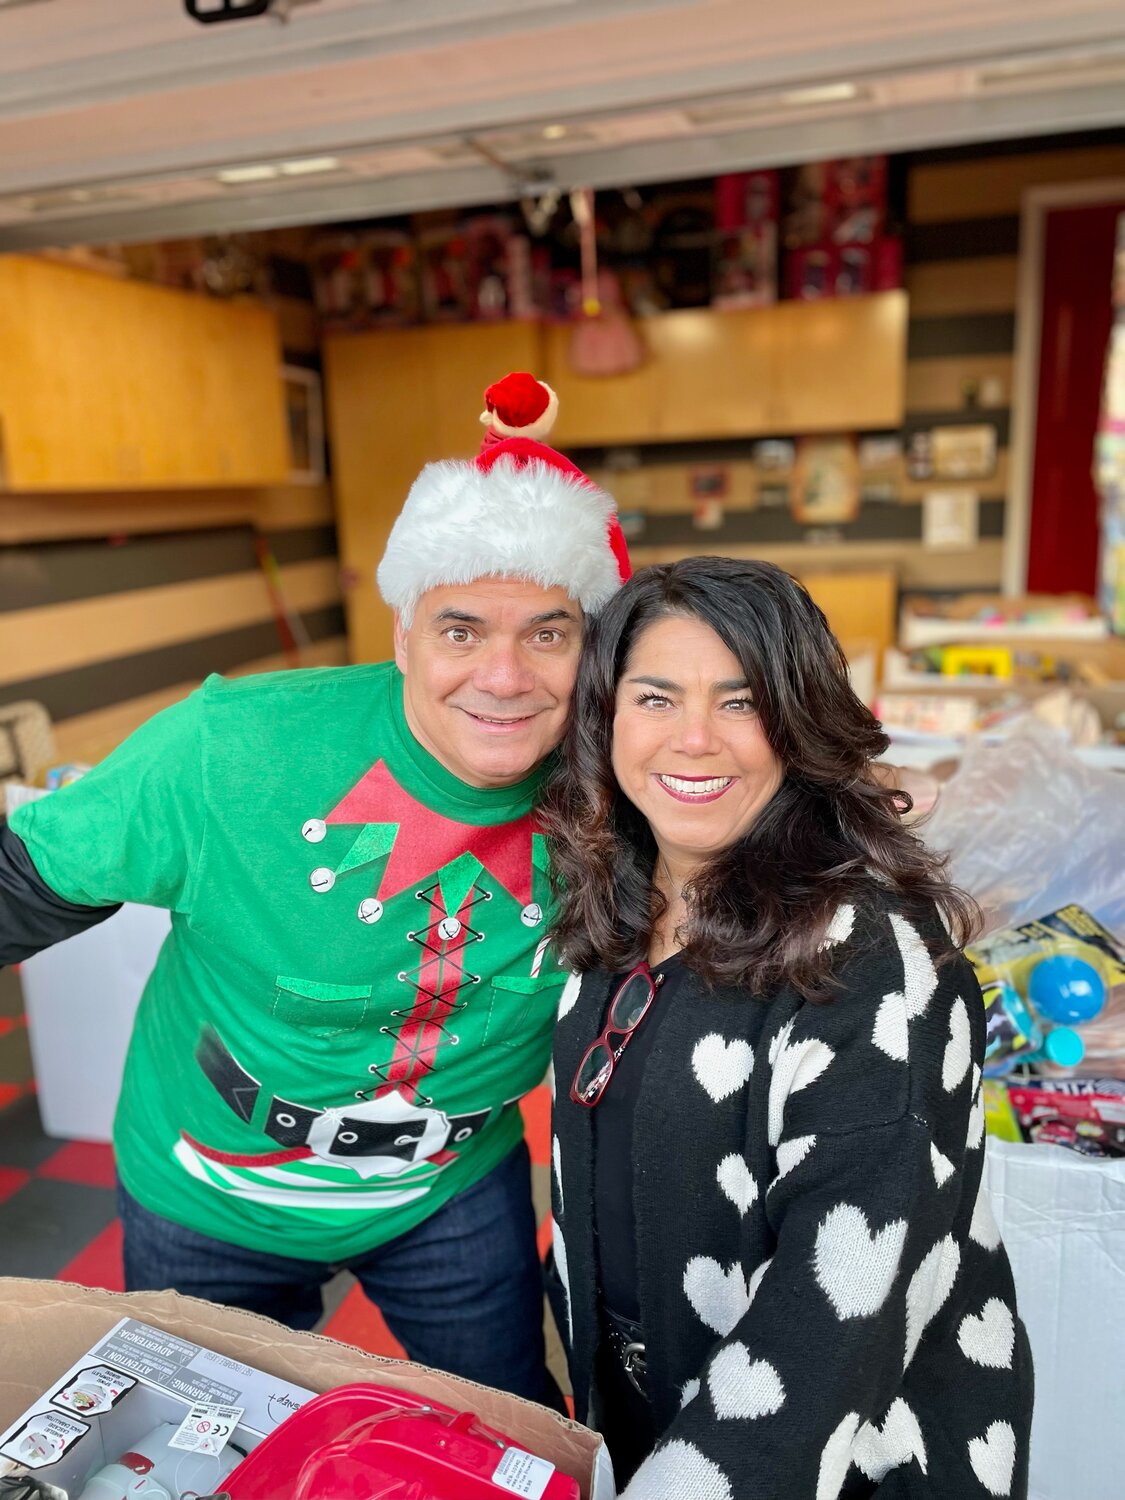 Joe Gallart, left, with his wife, Gina Bennicasa, has been collecting toys for Toys for Tots since 2016. This year, his efforts are the same, but in memory of his daughter, under the name ‘Desirae’s Darlings.’